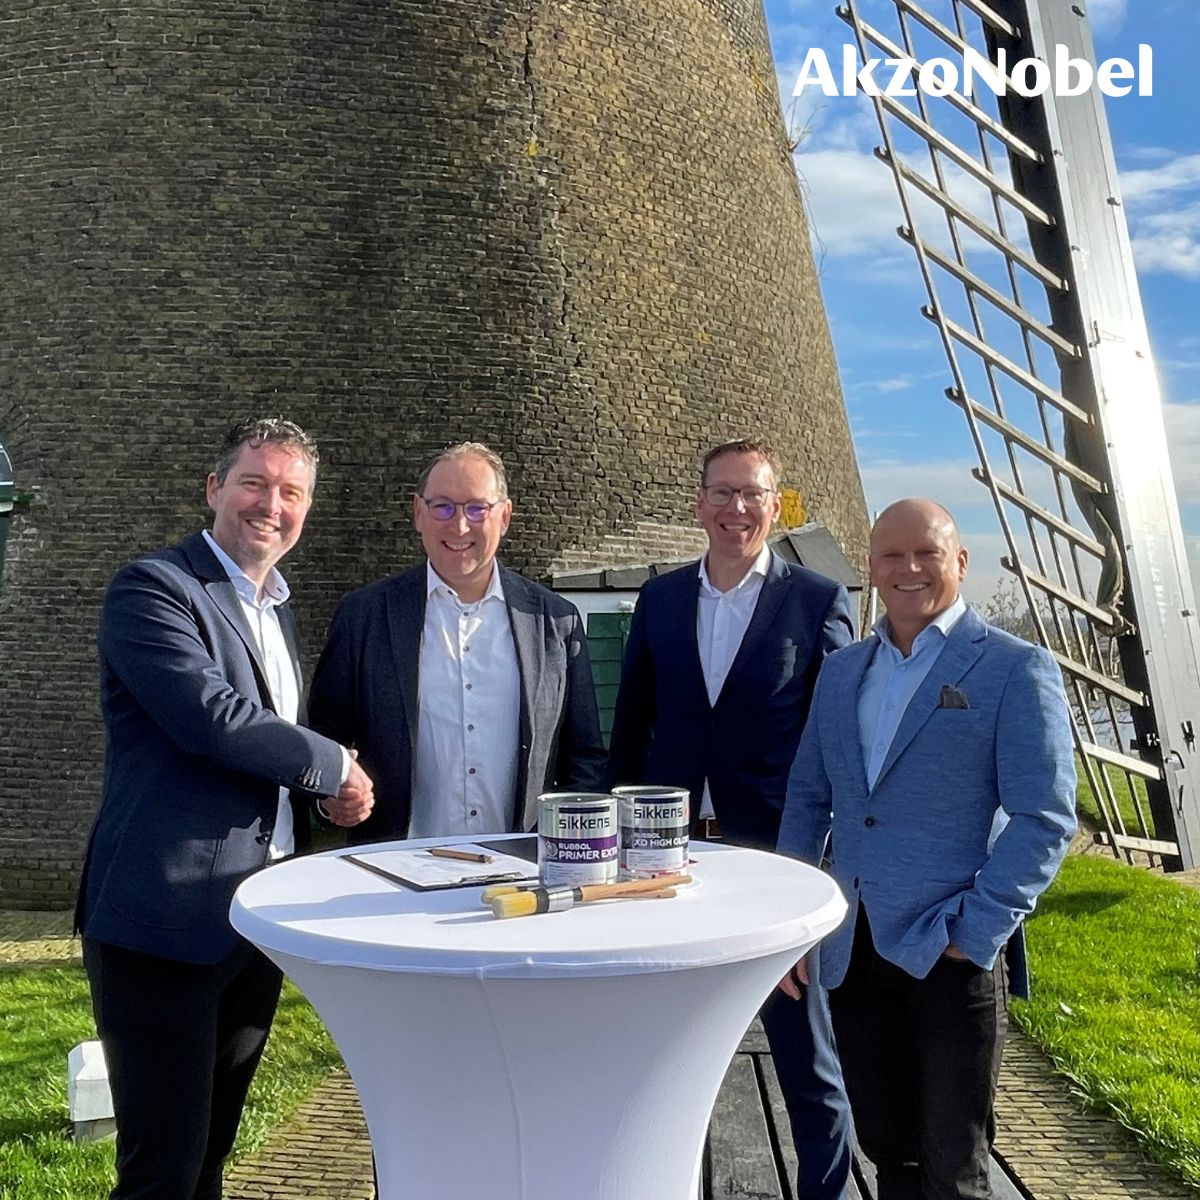 Visitors to @KinderdijkMills in the Netherlands can look forward to a picture-perfect view, thanks to the windmills we’re protecting with our Sikkens brand. Through our partnership with the UNESCO site, we’re preserving the iconic buildings and restoring their original colors.